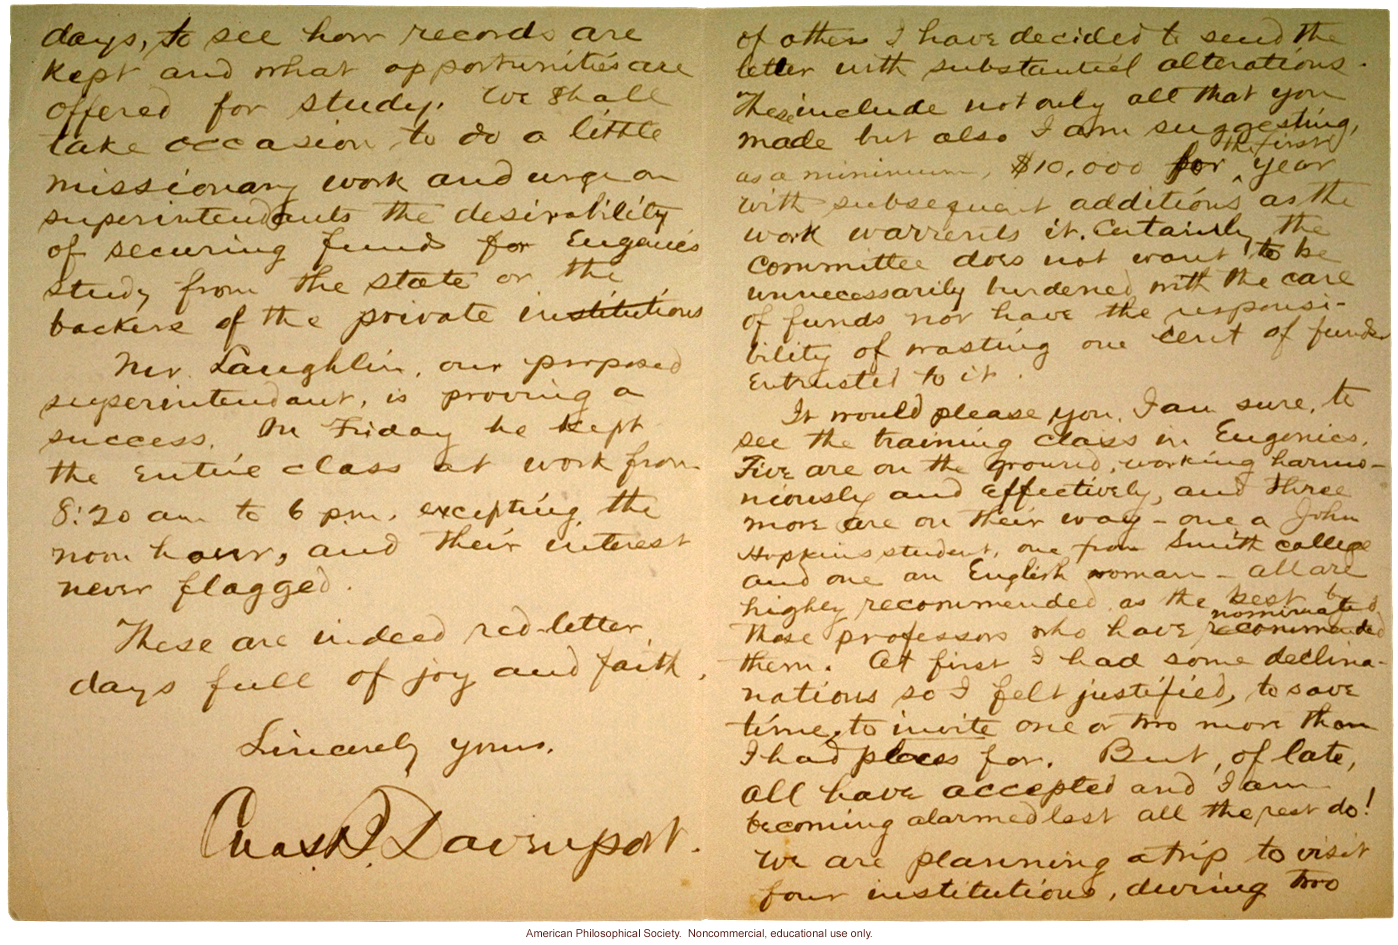 Charles Davenport letter to Mrs. E.H. Harriman about Eugenics Record Office (7/10/1910)